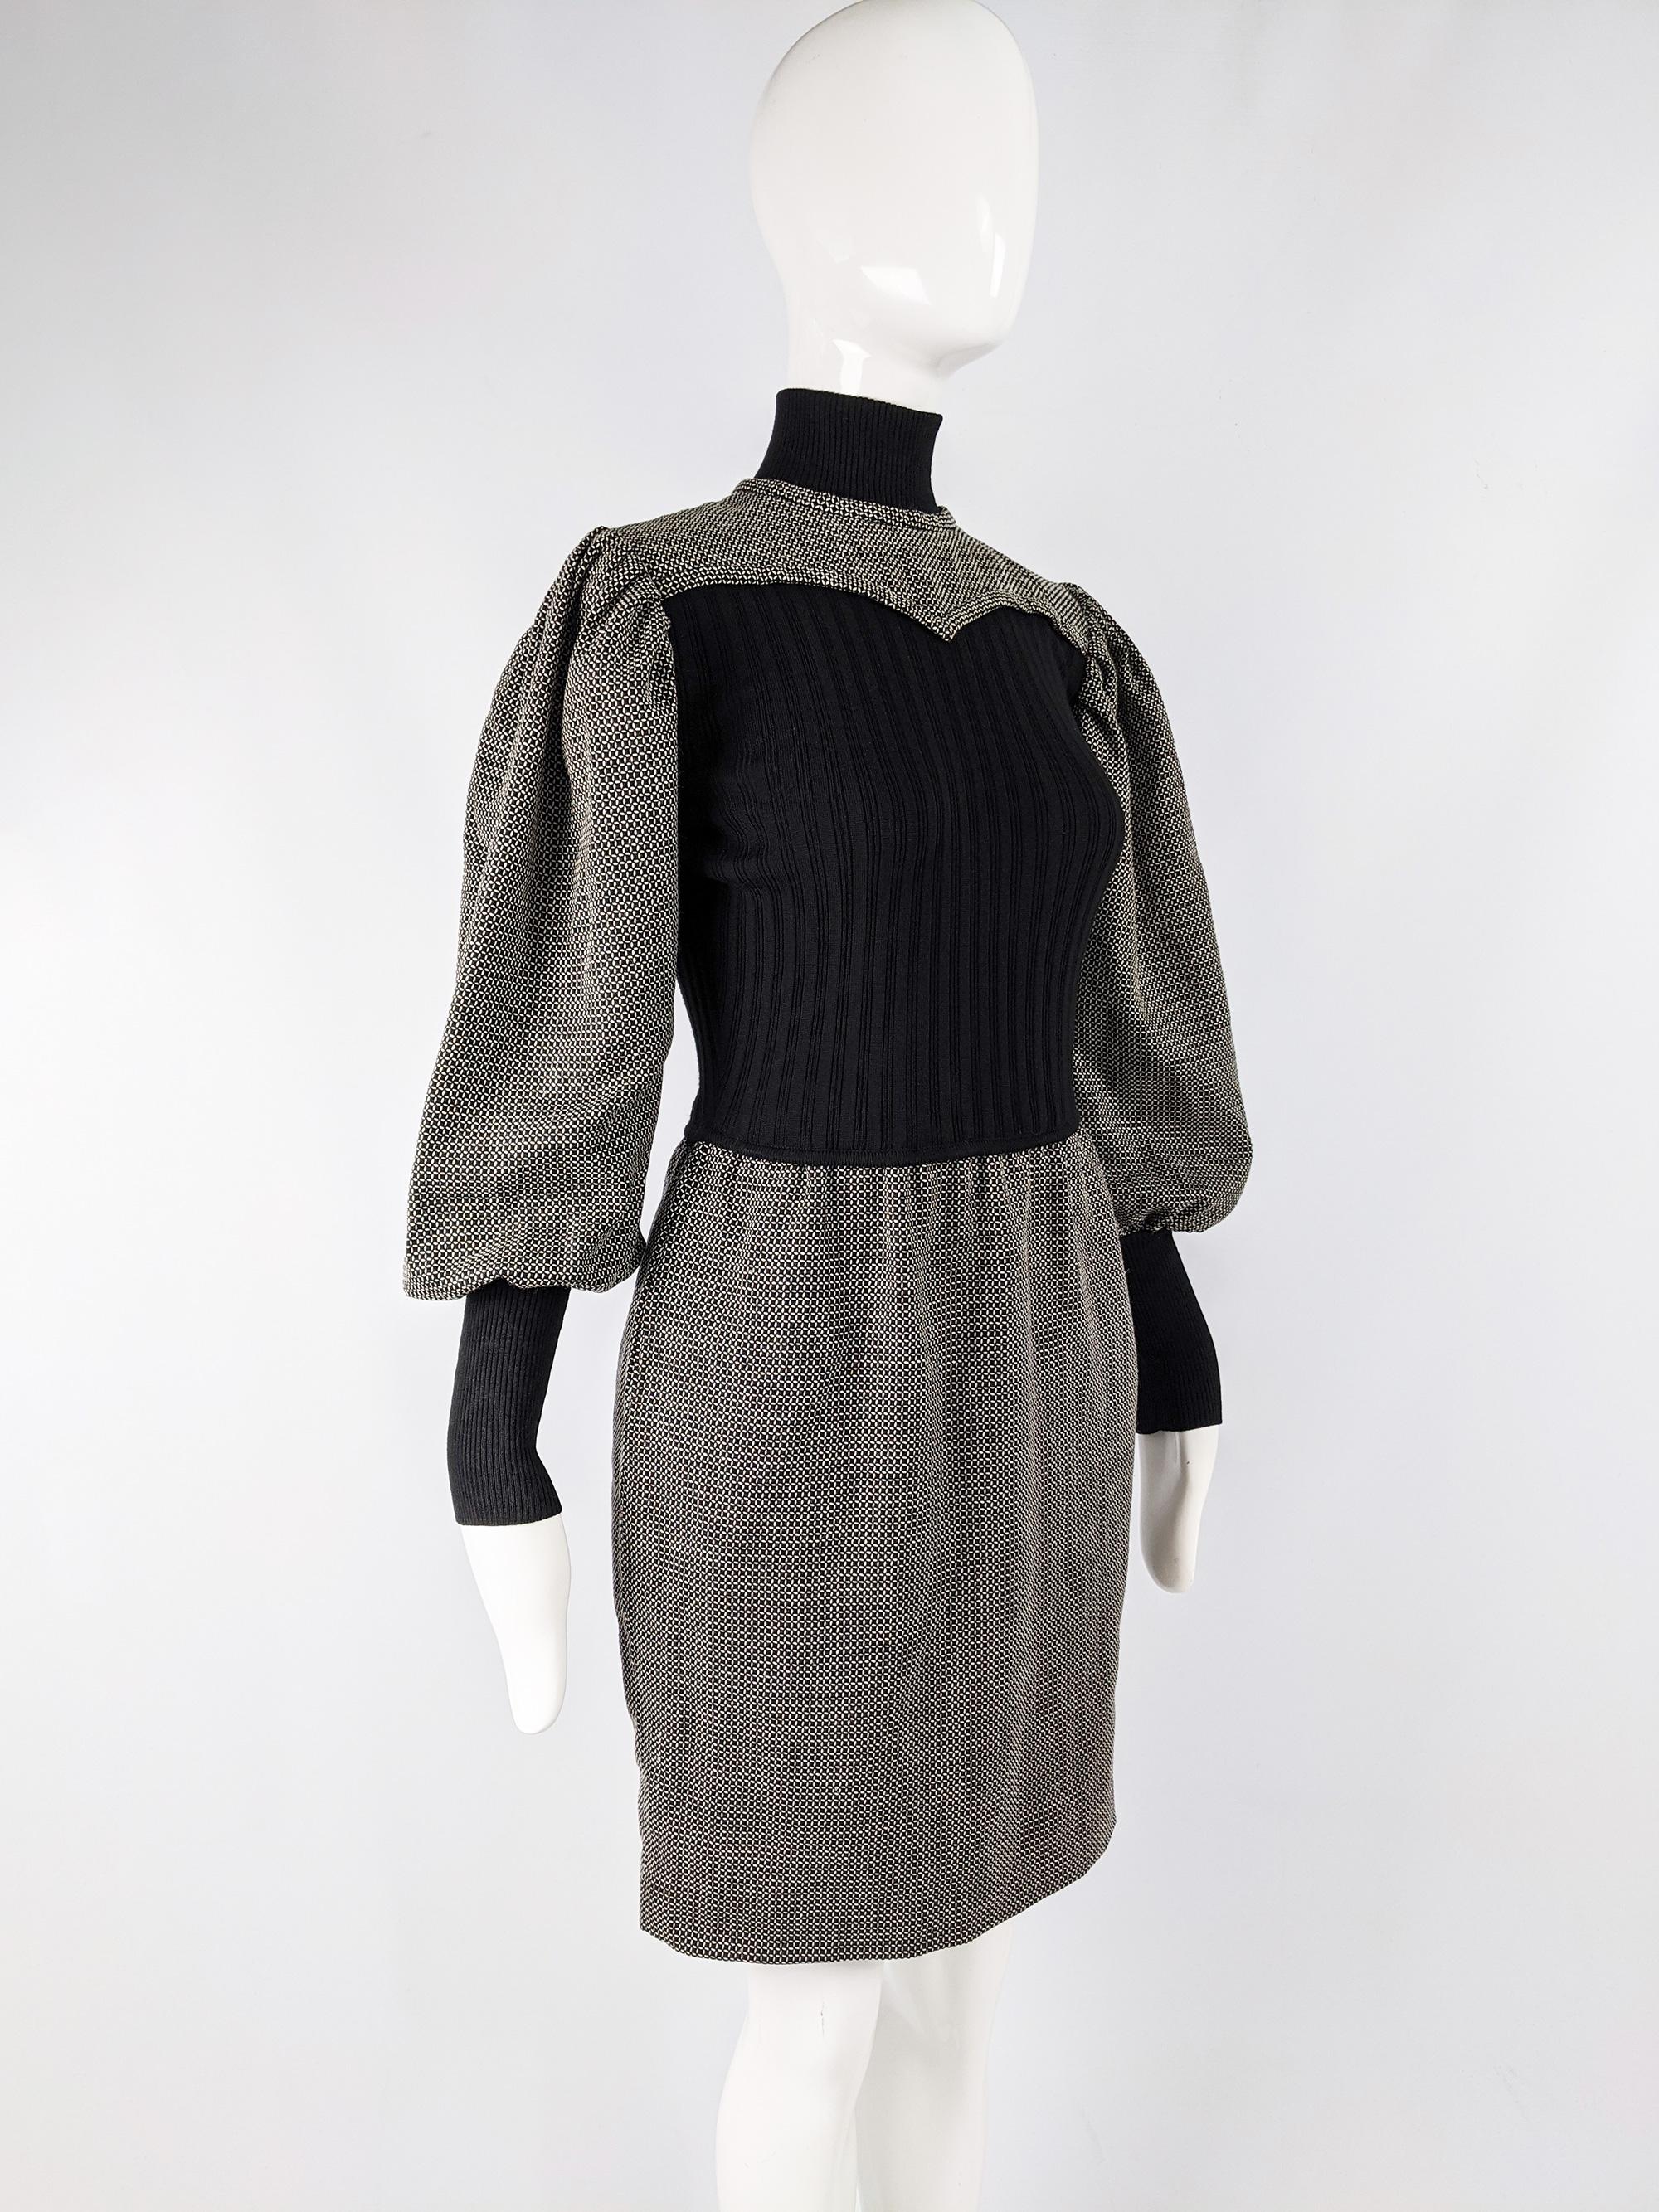 Emanuel Ungaro Black & White Puffed Sleeve Dress, 1980s In Excellent Condition For Sale In Doncaster, South Yorkshire